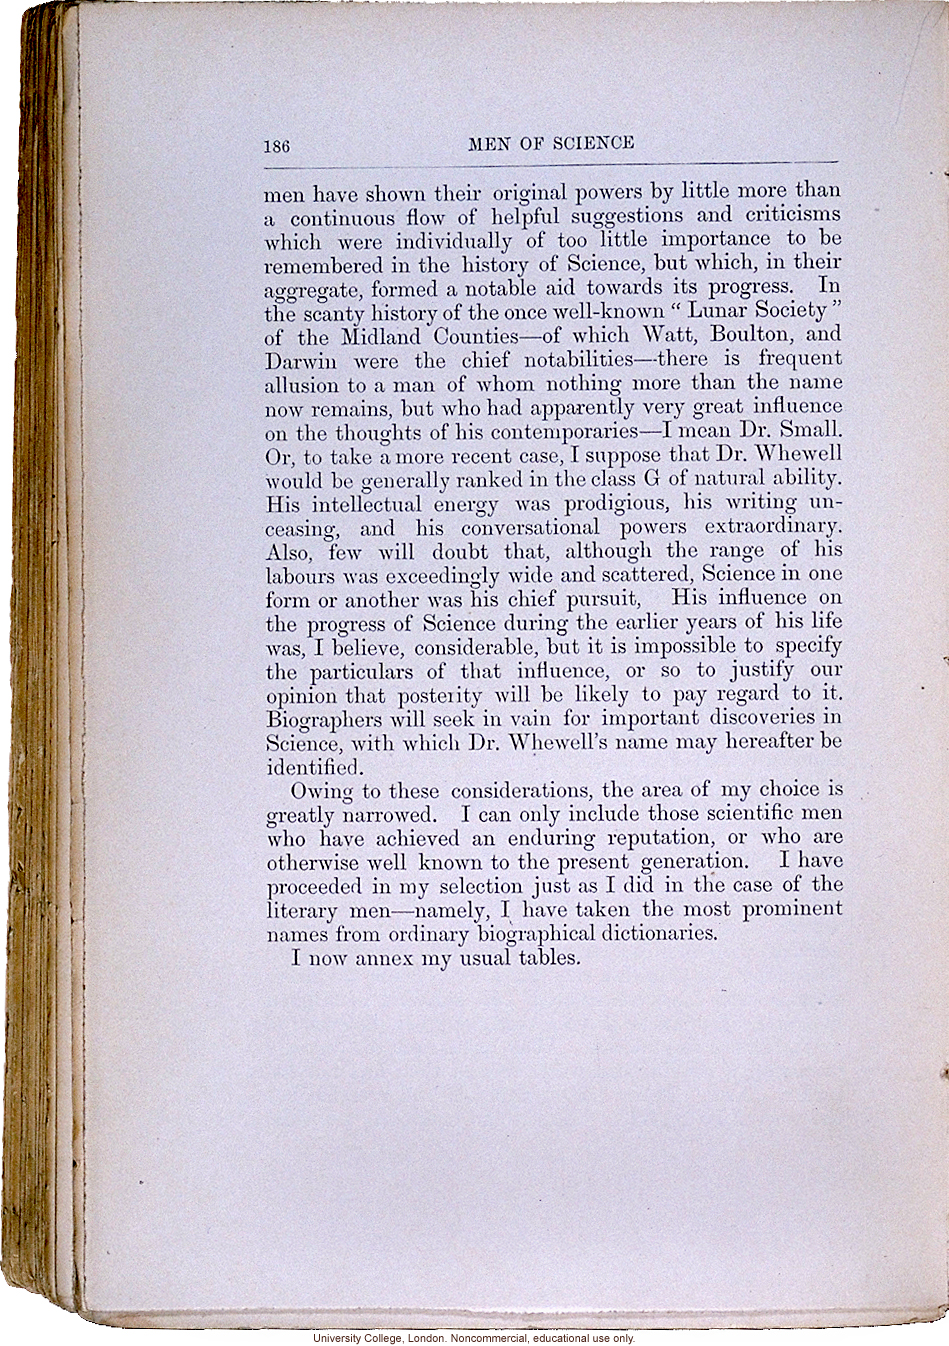 <i> Hereditary Genius: An Enquiry into Its Laws and Consequences</i> (2nd ed.), by Francis Galton, selected pages